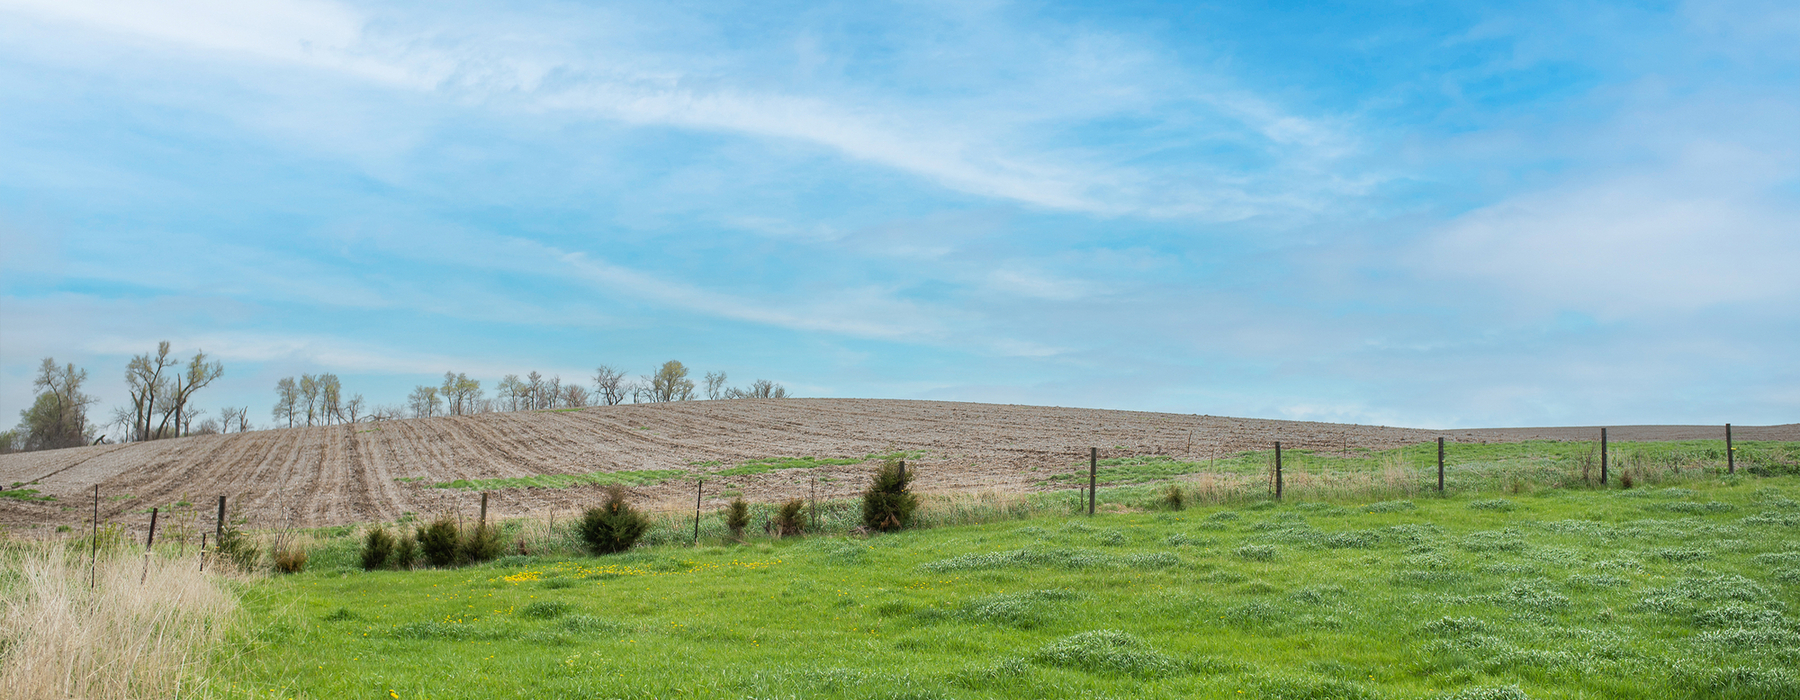 Blue sky, row crop field in the background with a green pasture in the foreground with a fence down the middle